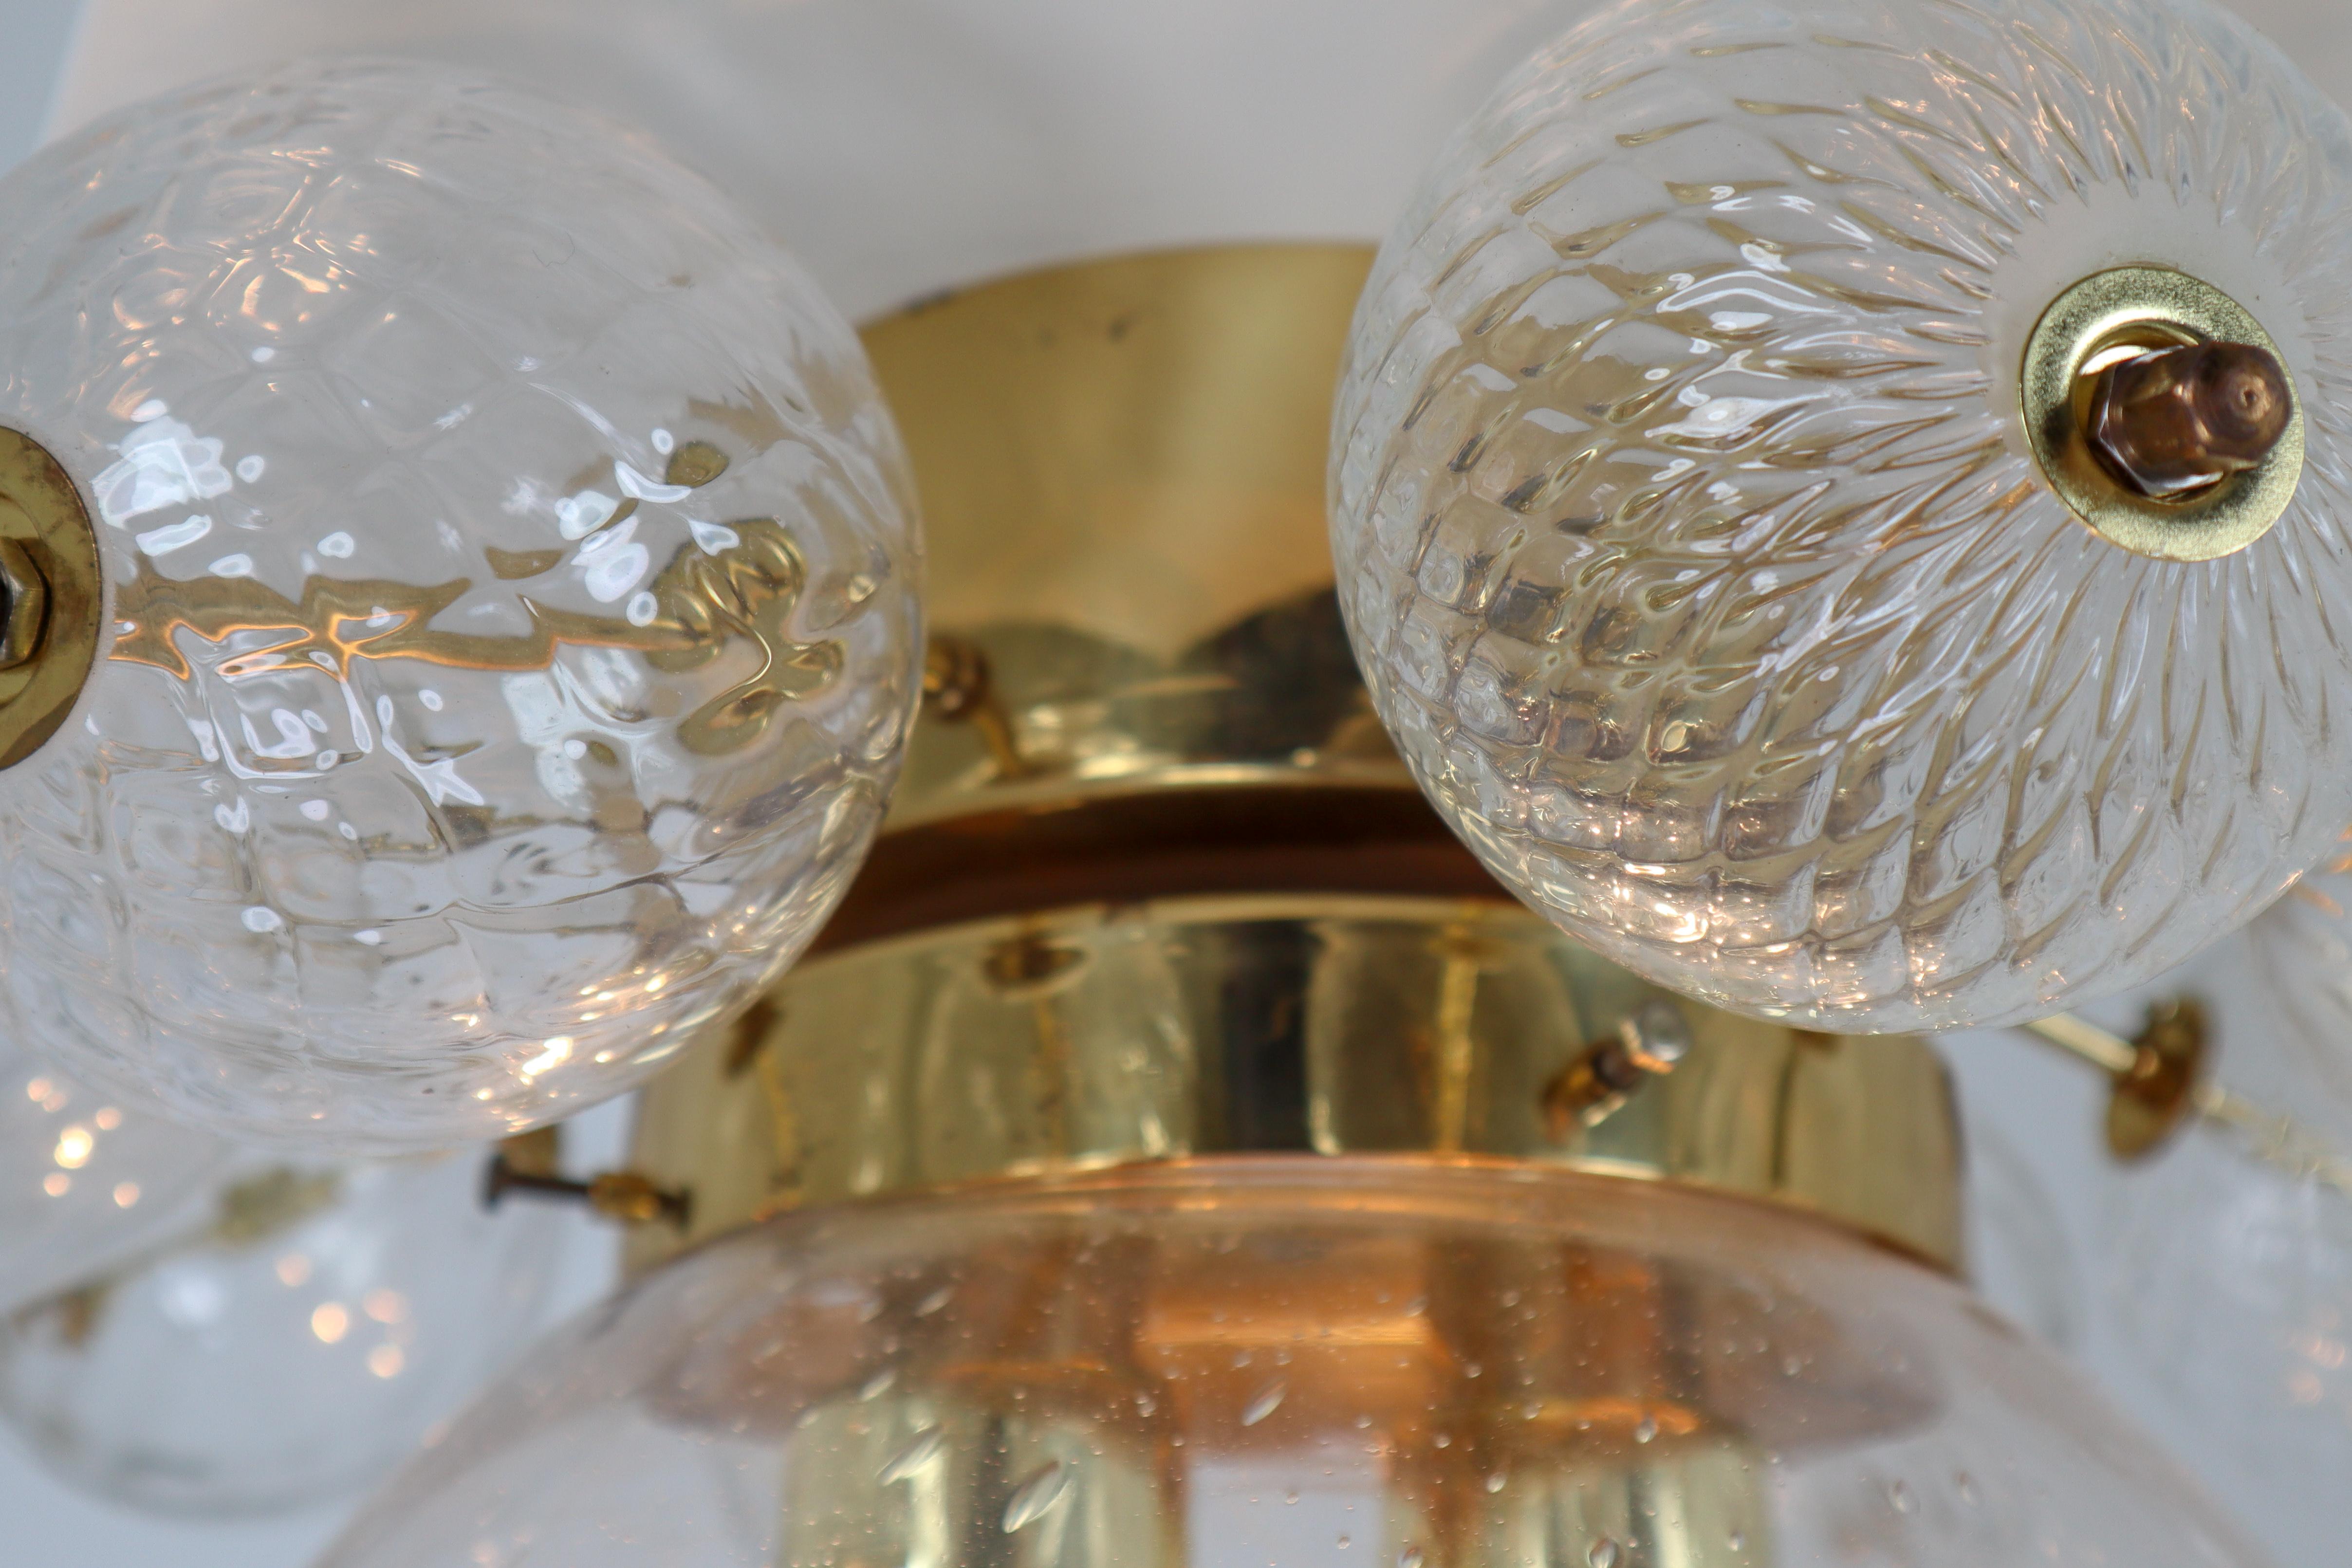 Austrian Set of Two Midcentury Brass Ceiling Lamp-Chandeliers with Handblown Glass